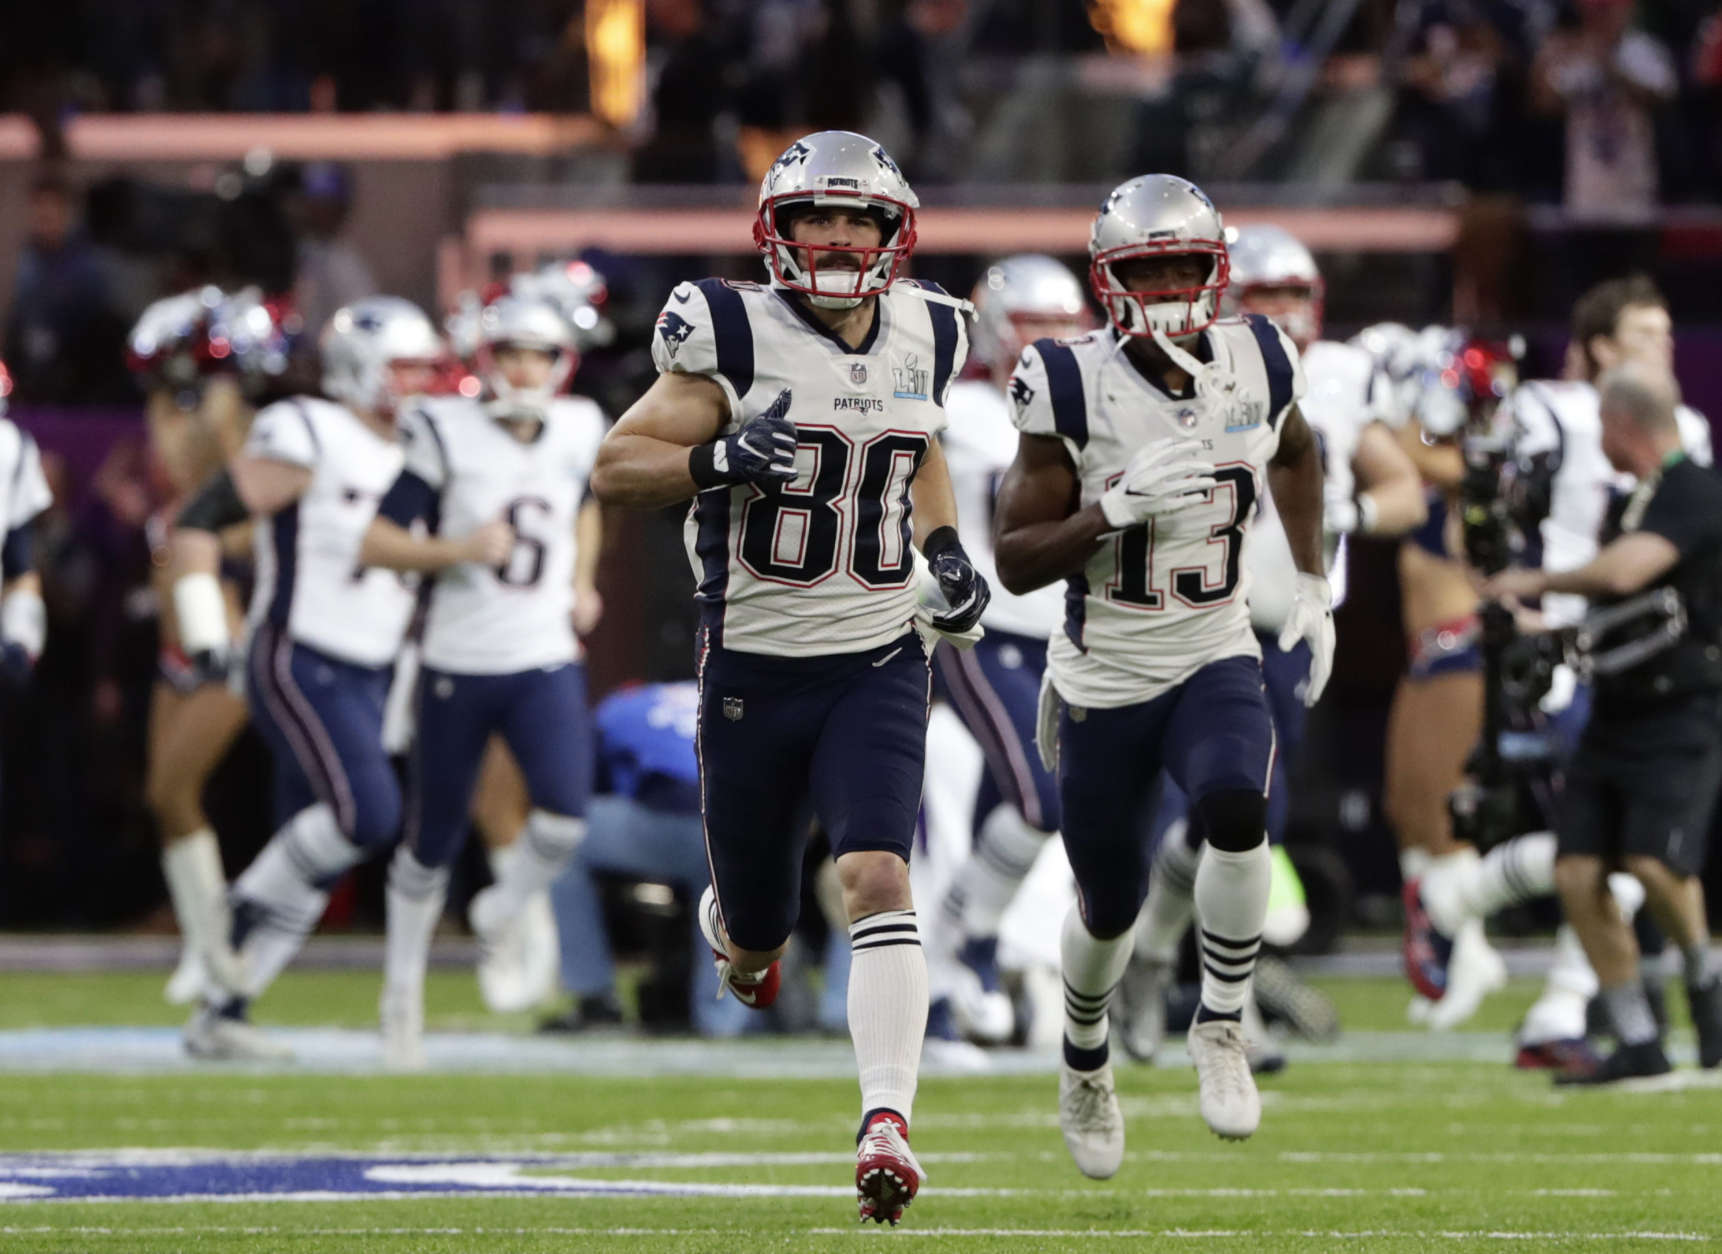 New England Patriots wide receiver Danny Amendola (80), wide receiver Phillip Dorsett (13) and the rest of the team, run on the field as they are introduced before the NFL Super Bowl 52 football game against the Philadelphia Eagles, Sunday, Feb. 4, 2018, in Minneapolis. (AP Photo/Frank Franklin II)